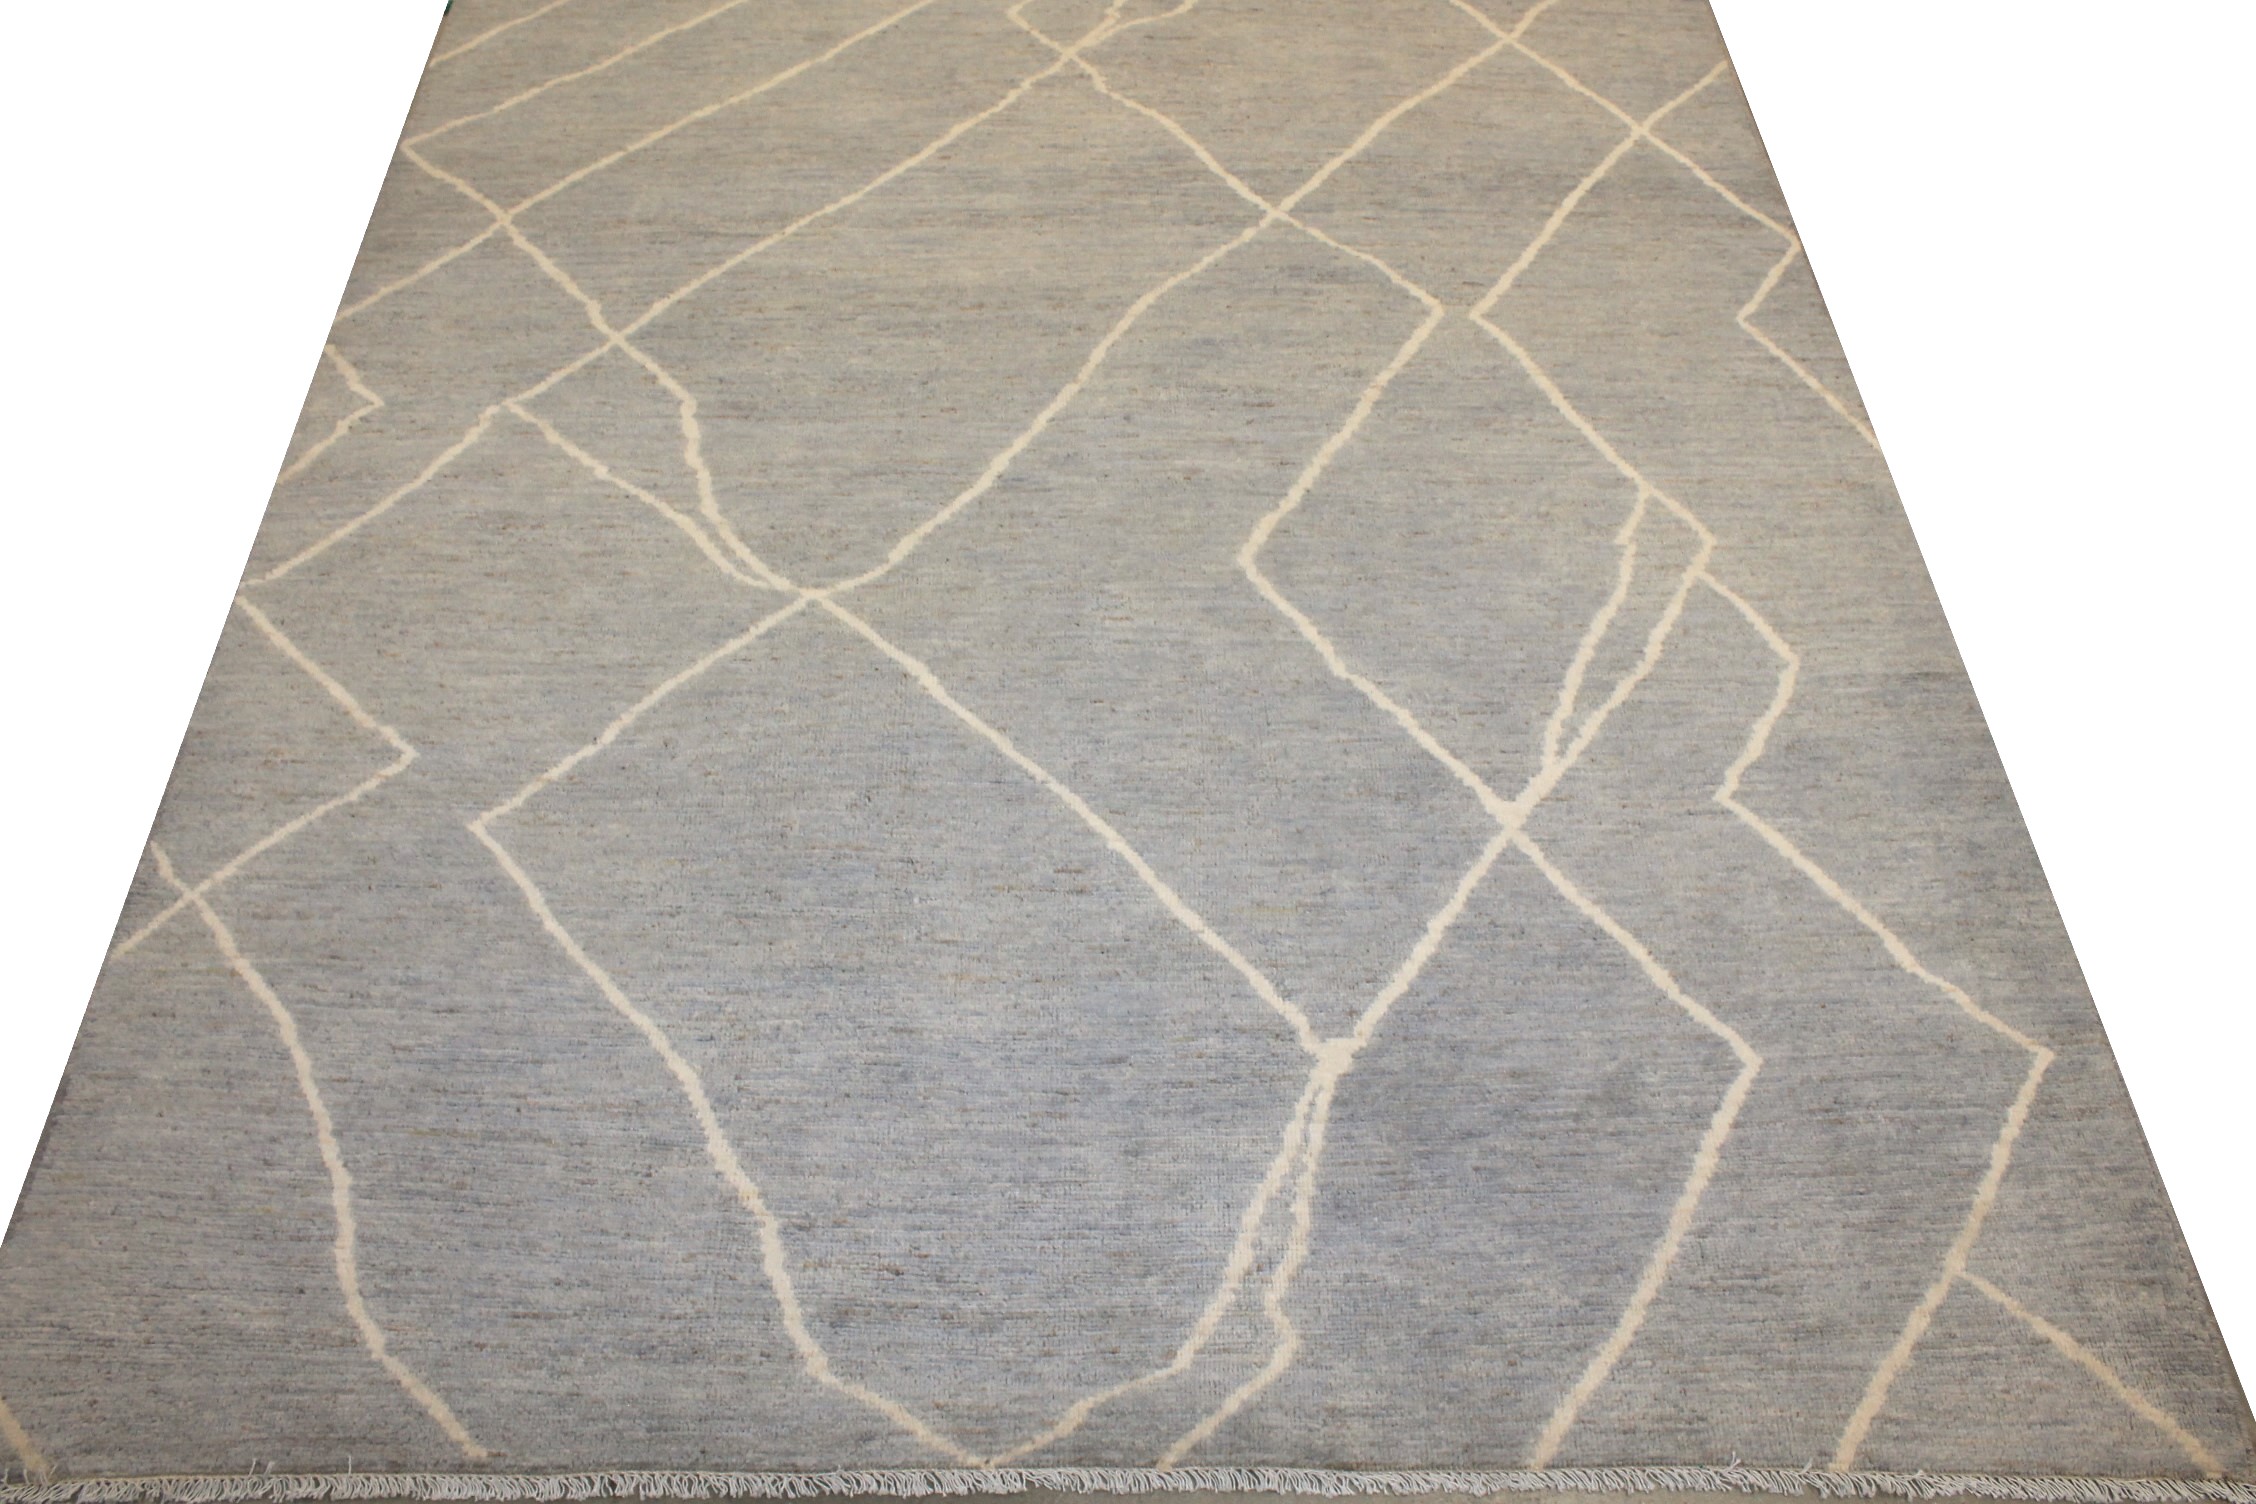 8x10 Tribal Hand Knotted Wool Area Rug - MR027207